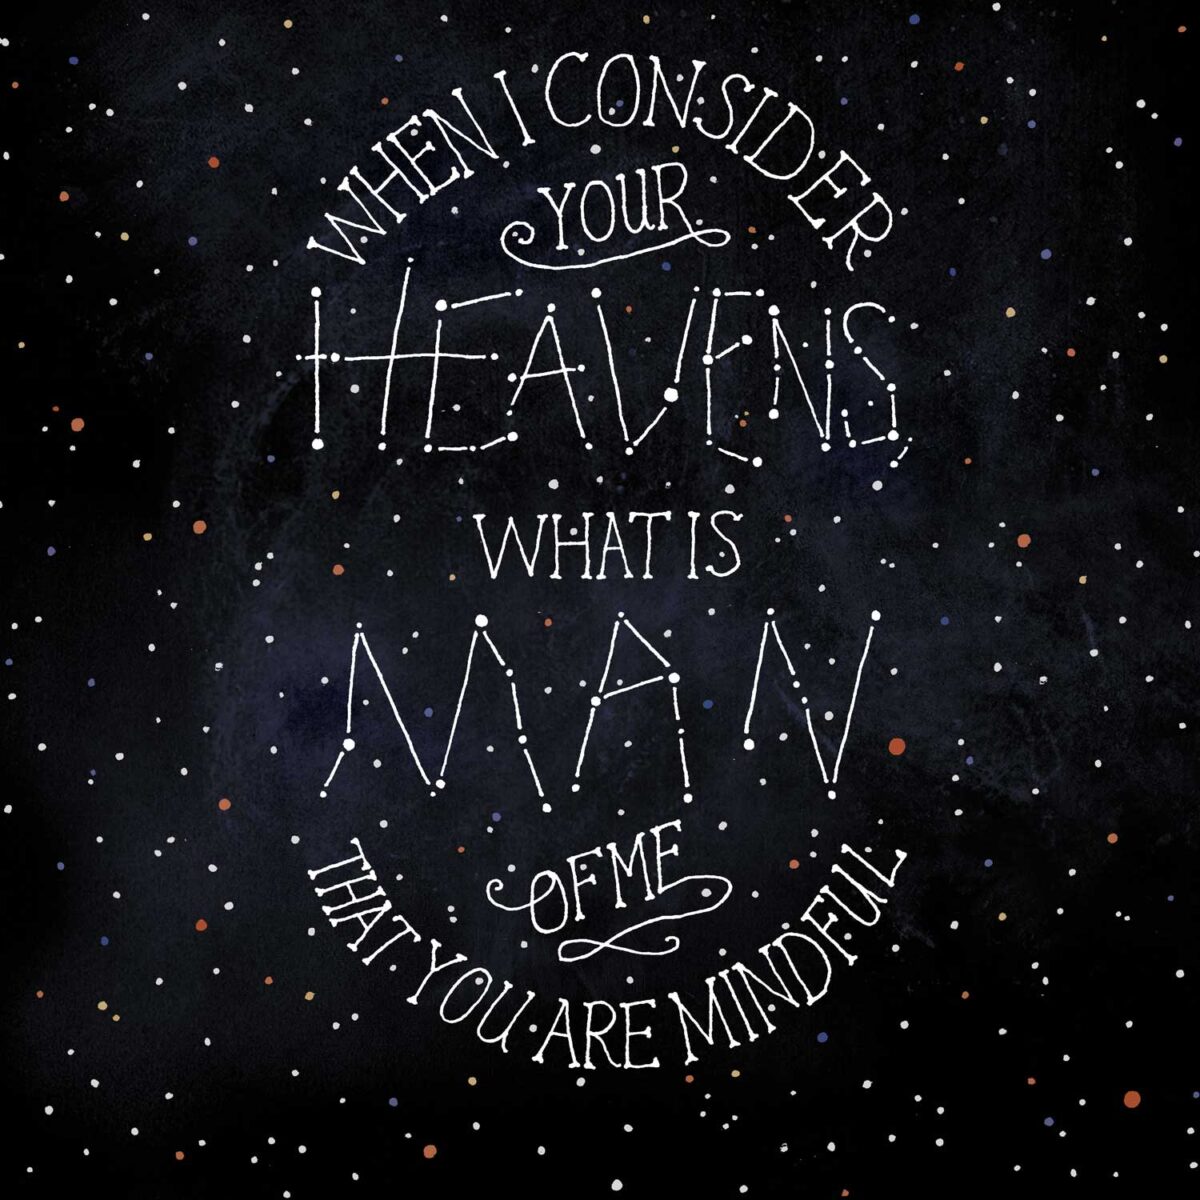 A background of stars with hand lettering made of constellations that reads: What I consider your heavens, what is man that you are mindful of me